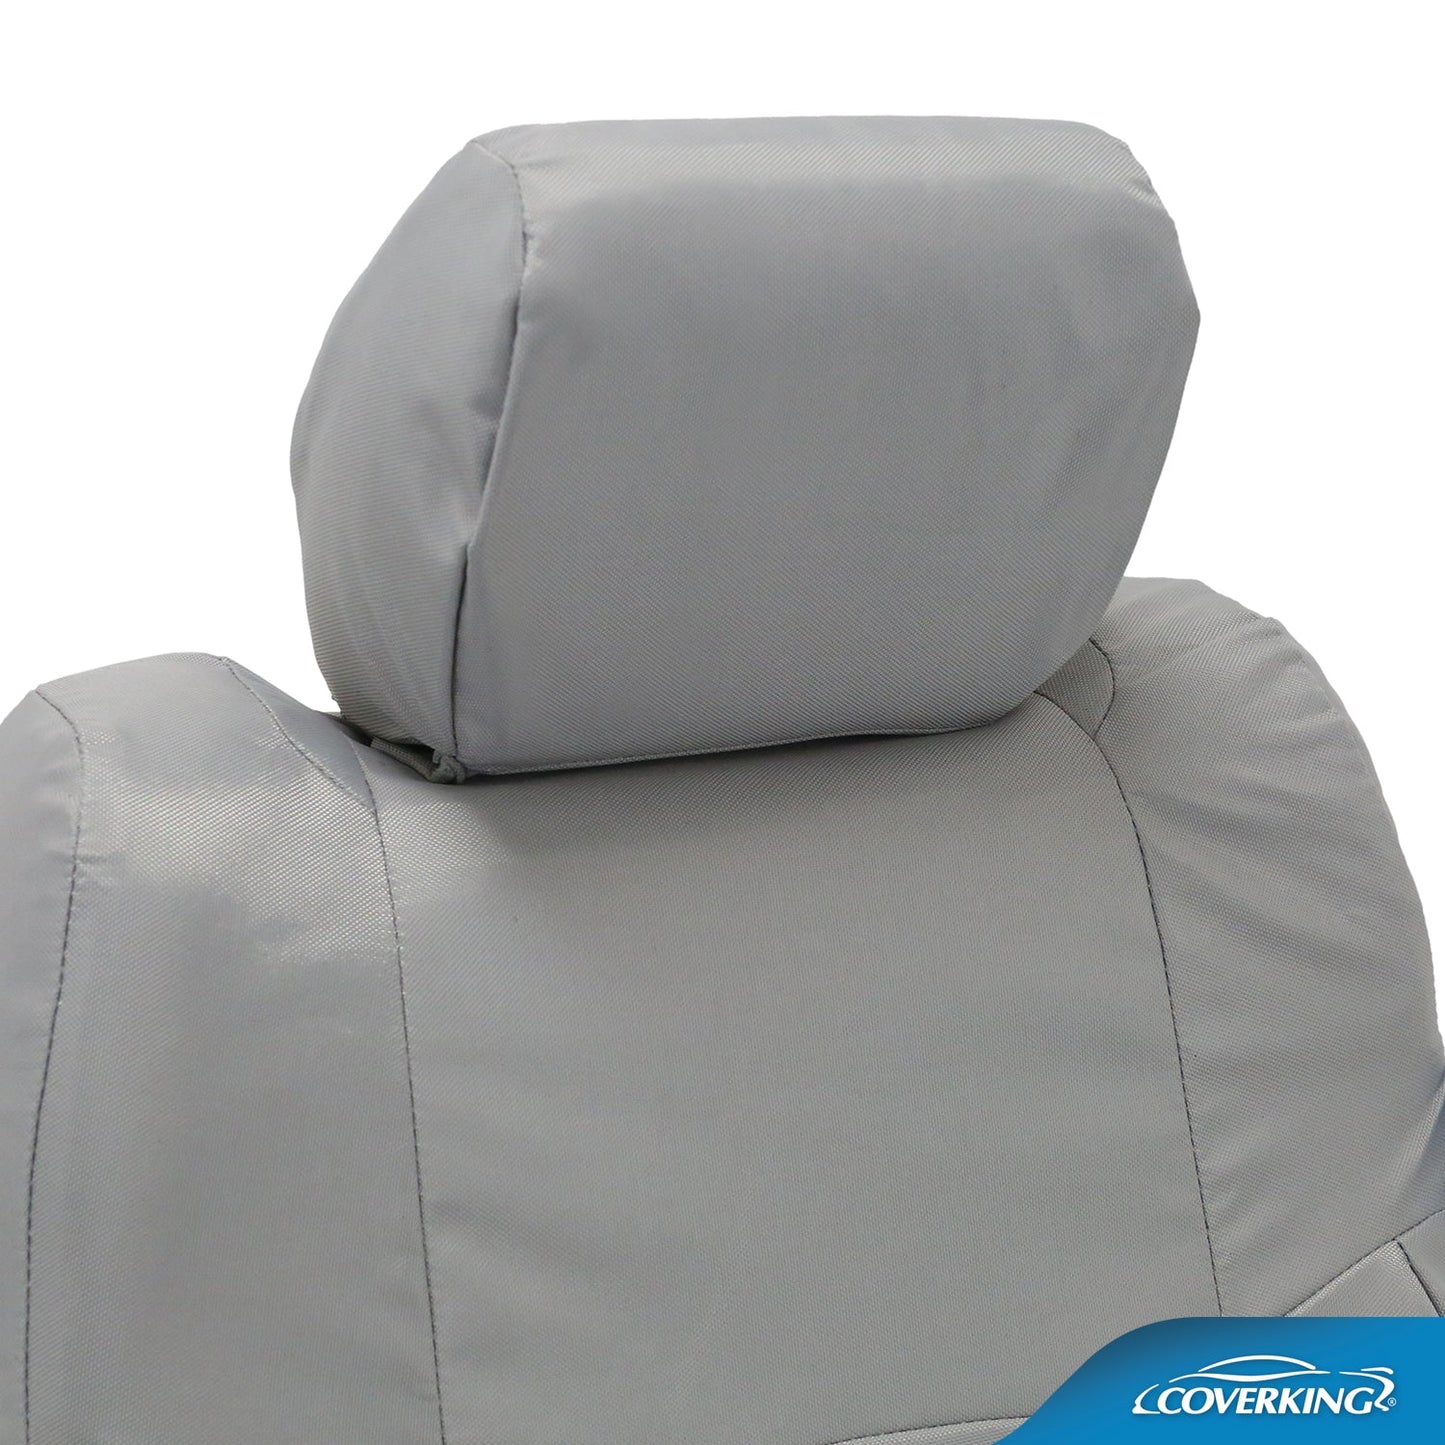 Coverking Ballistic Seat Covers - Partsaccessoriesusa